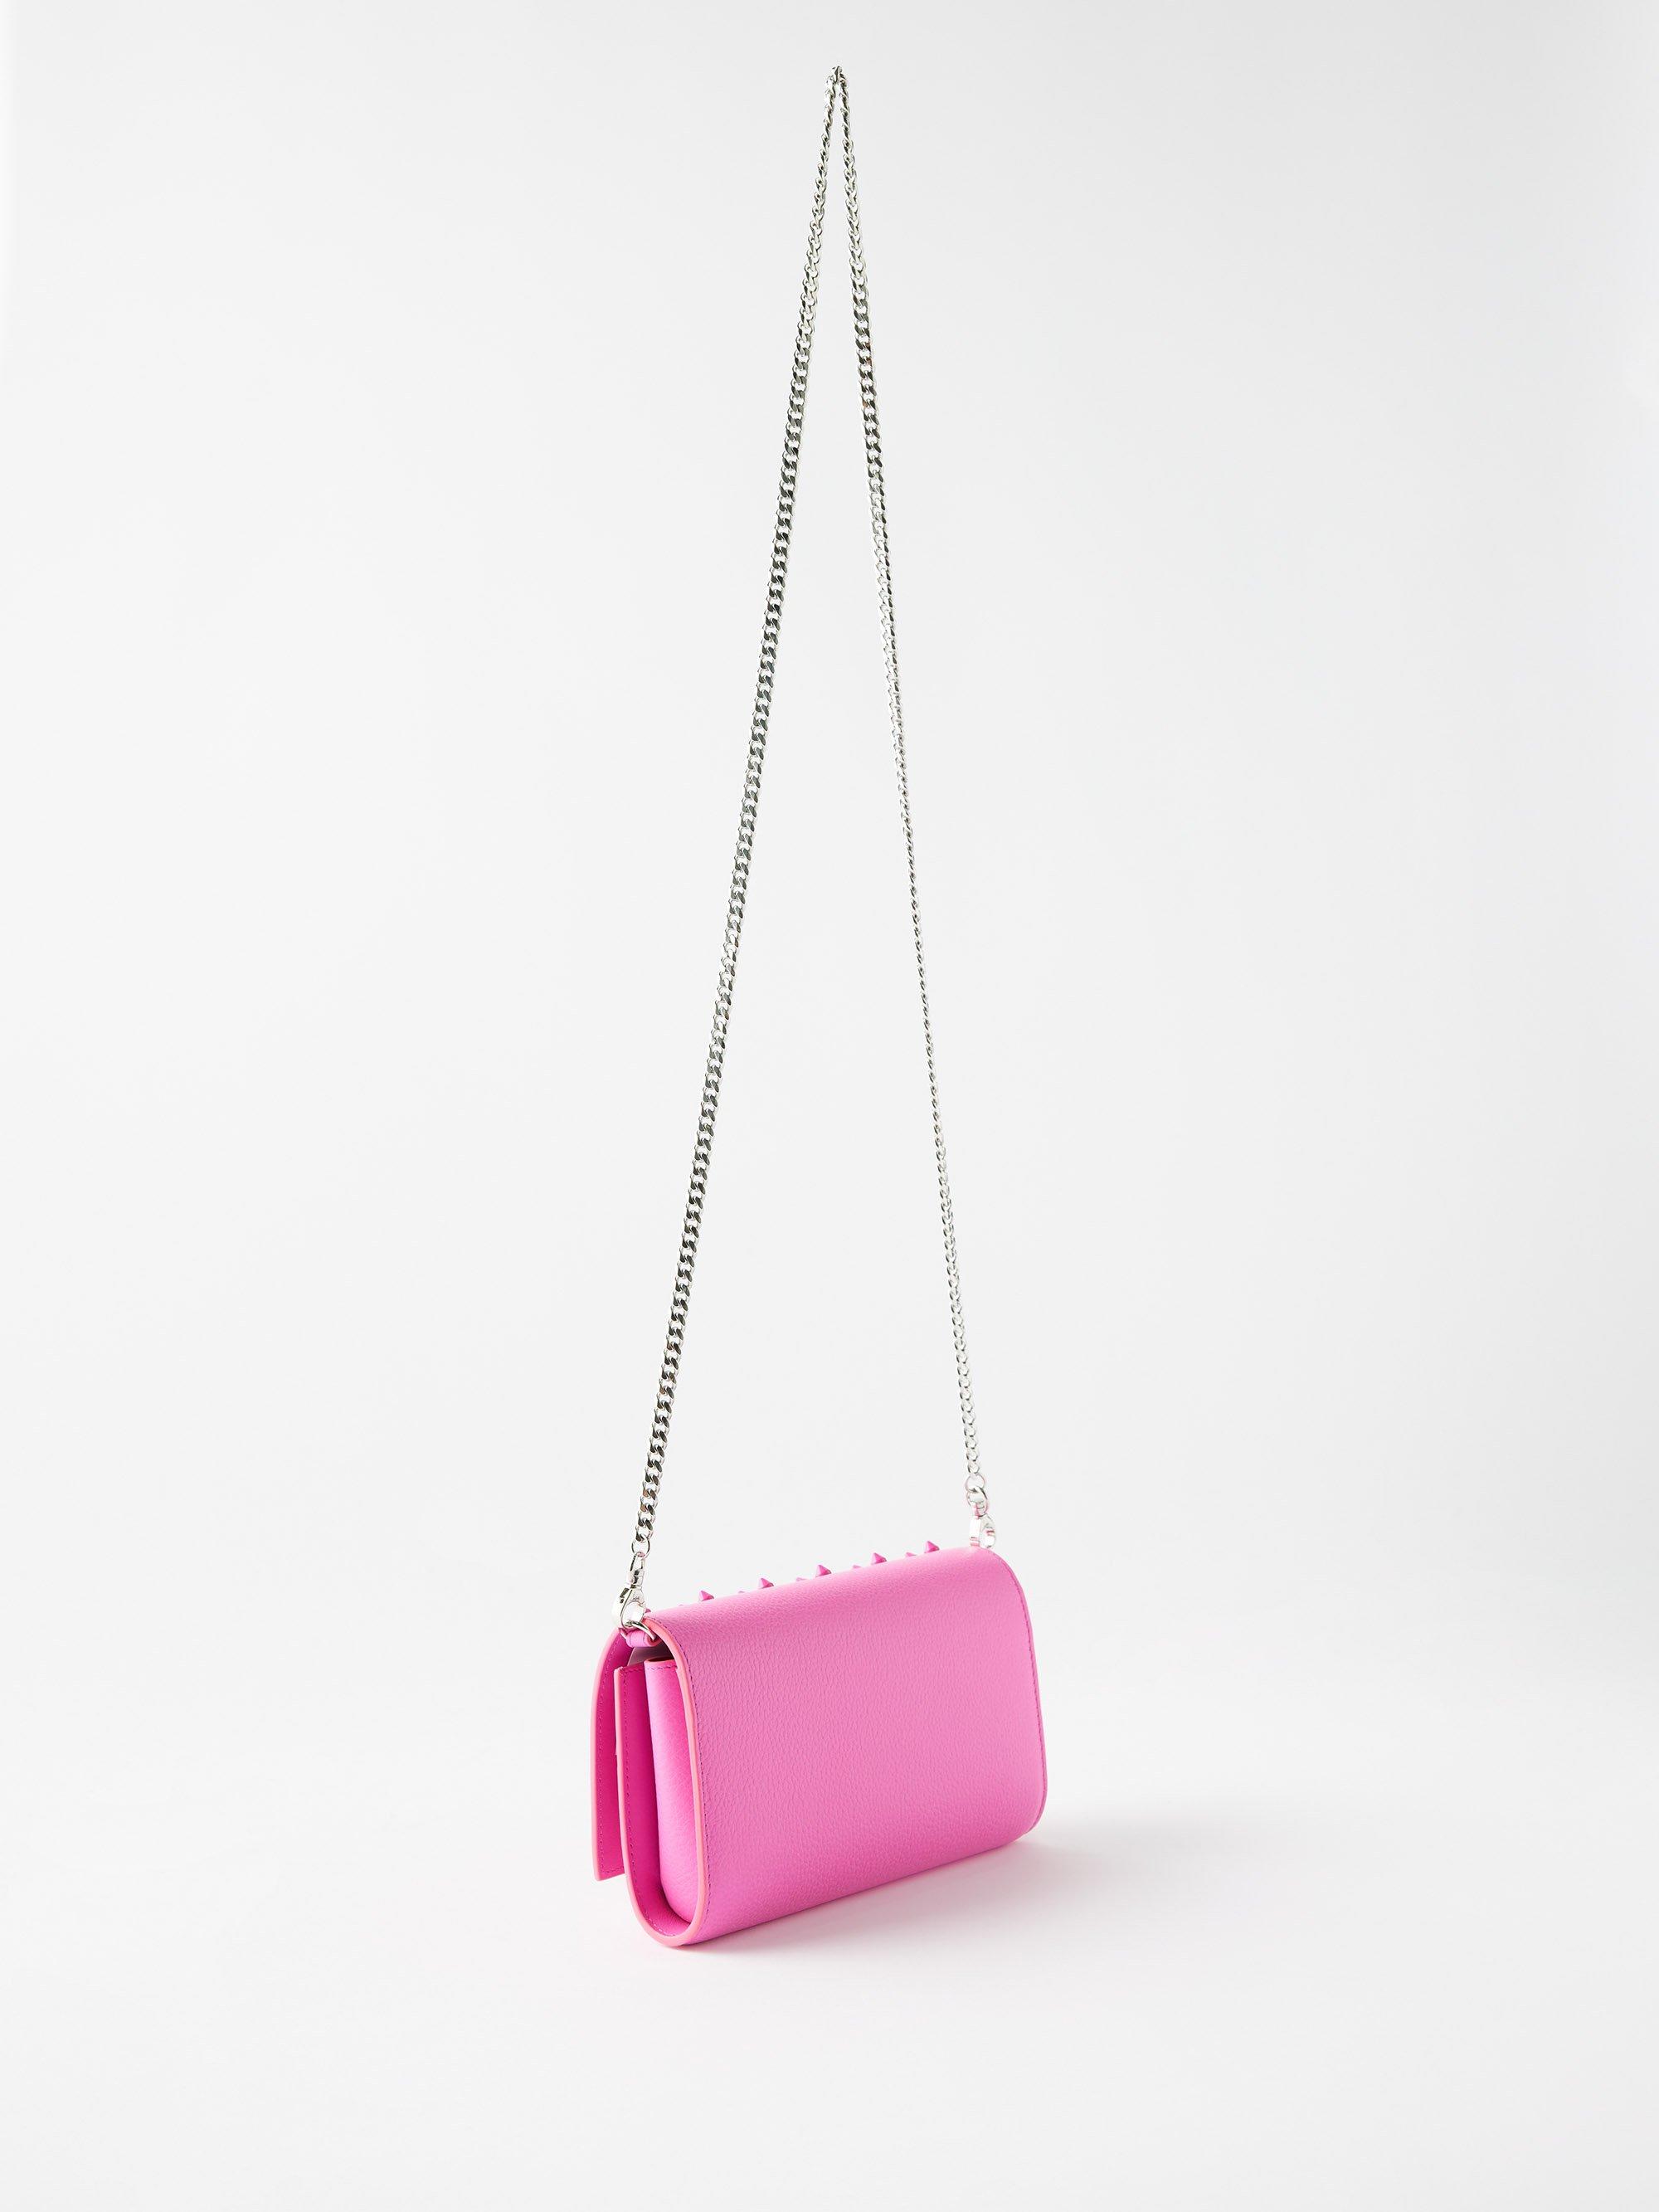 Christian Louboutin Paloma Clutch Embellished Leather Small Pink